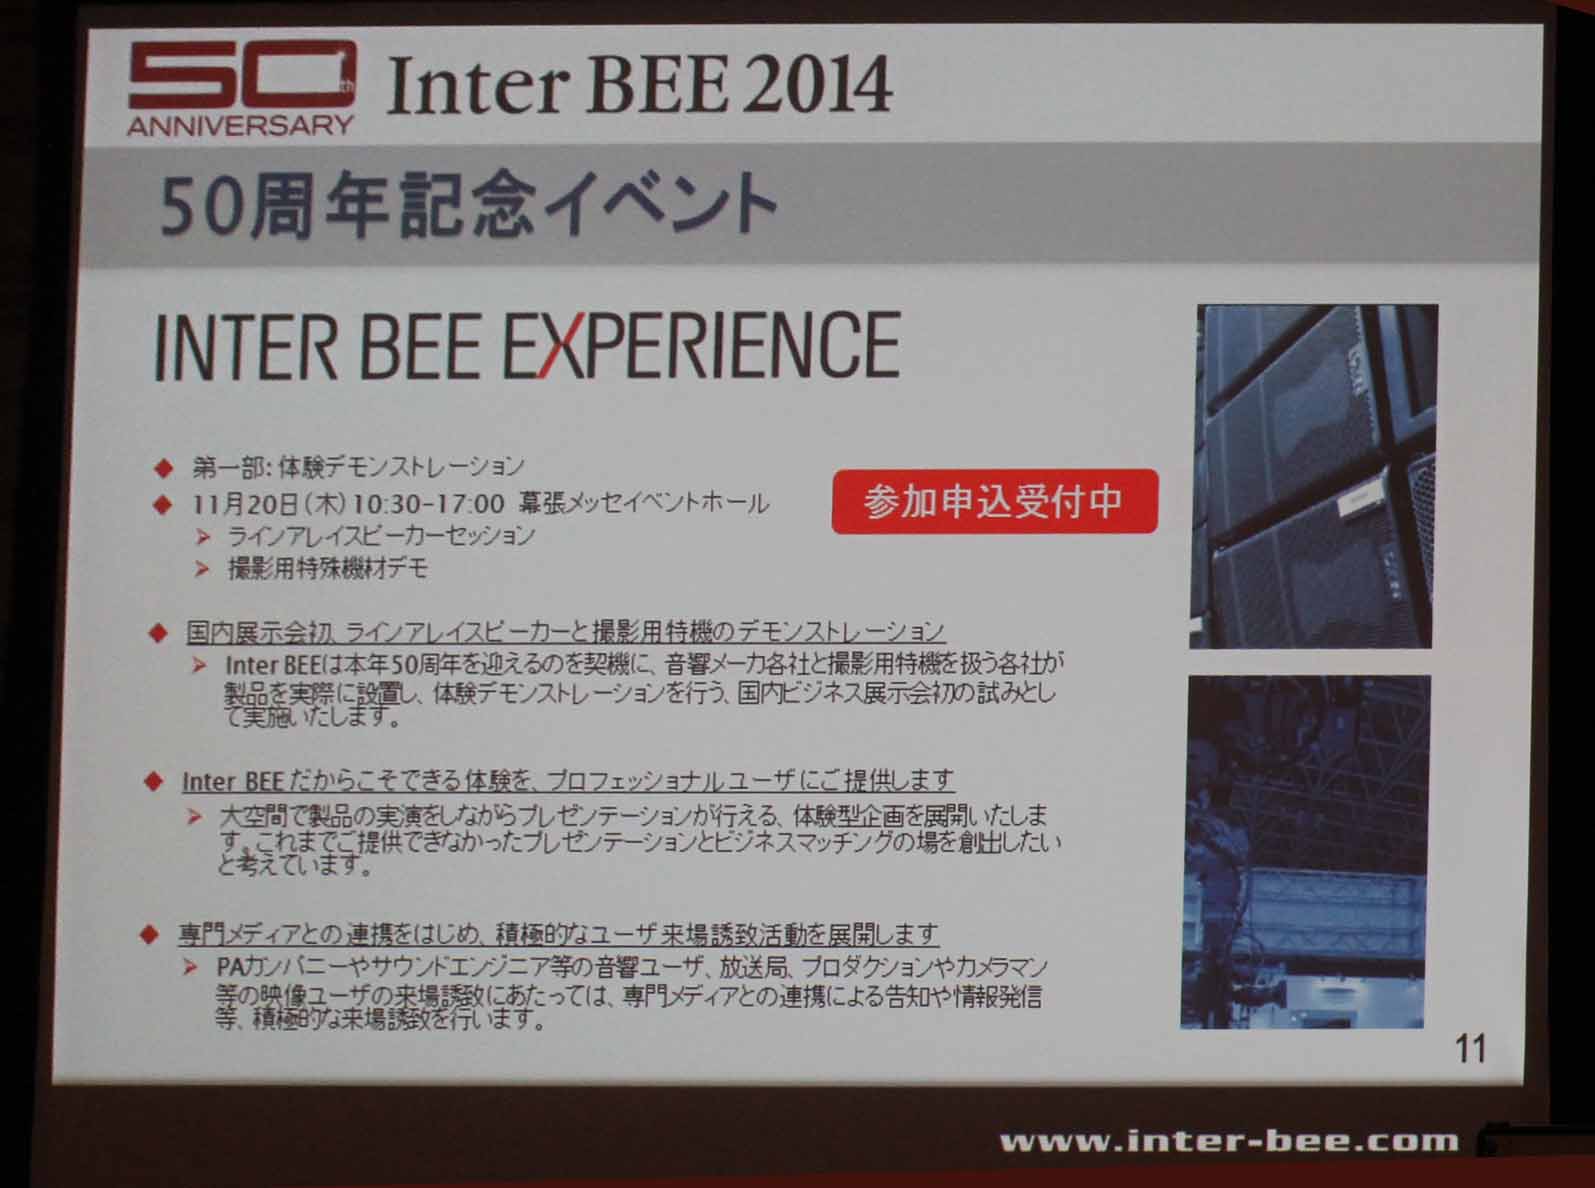 Description for INTER BEE EXPERIENCE, an event to commemorate the 50th anniversary.